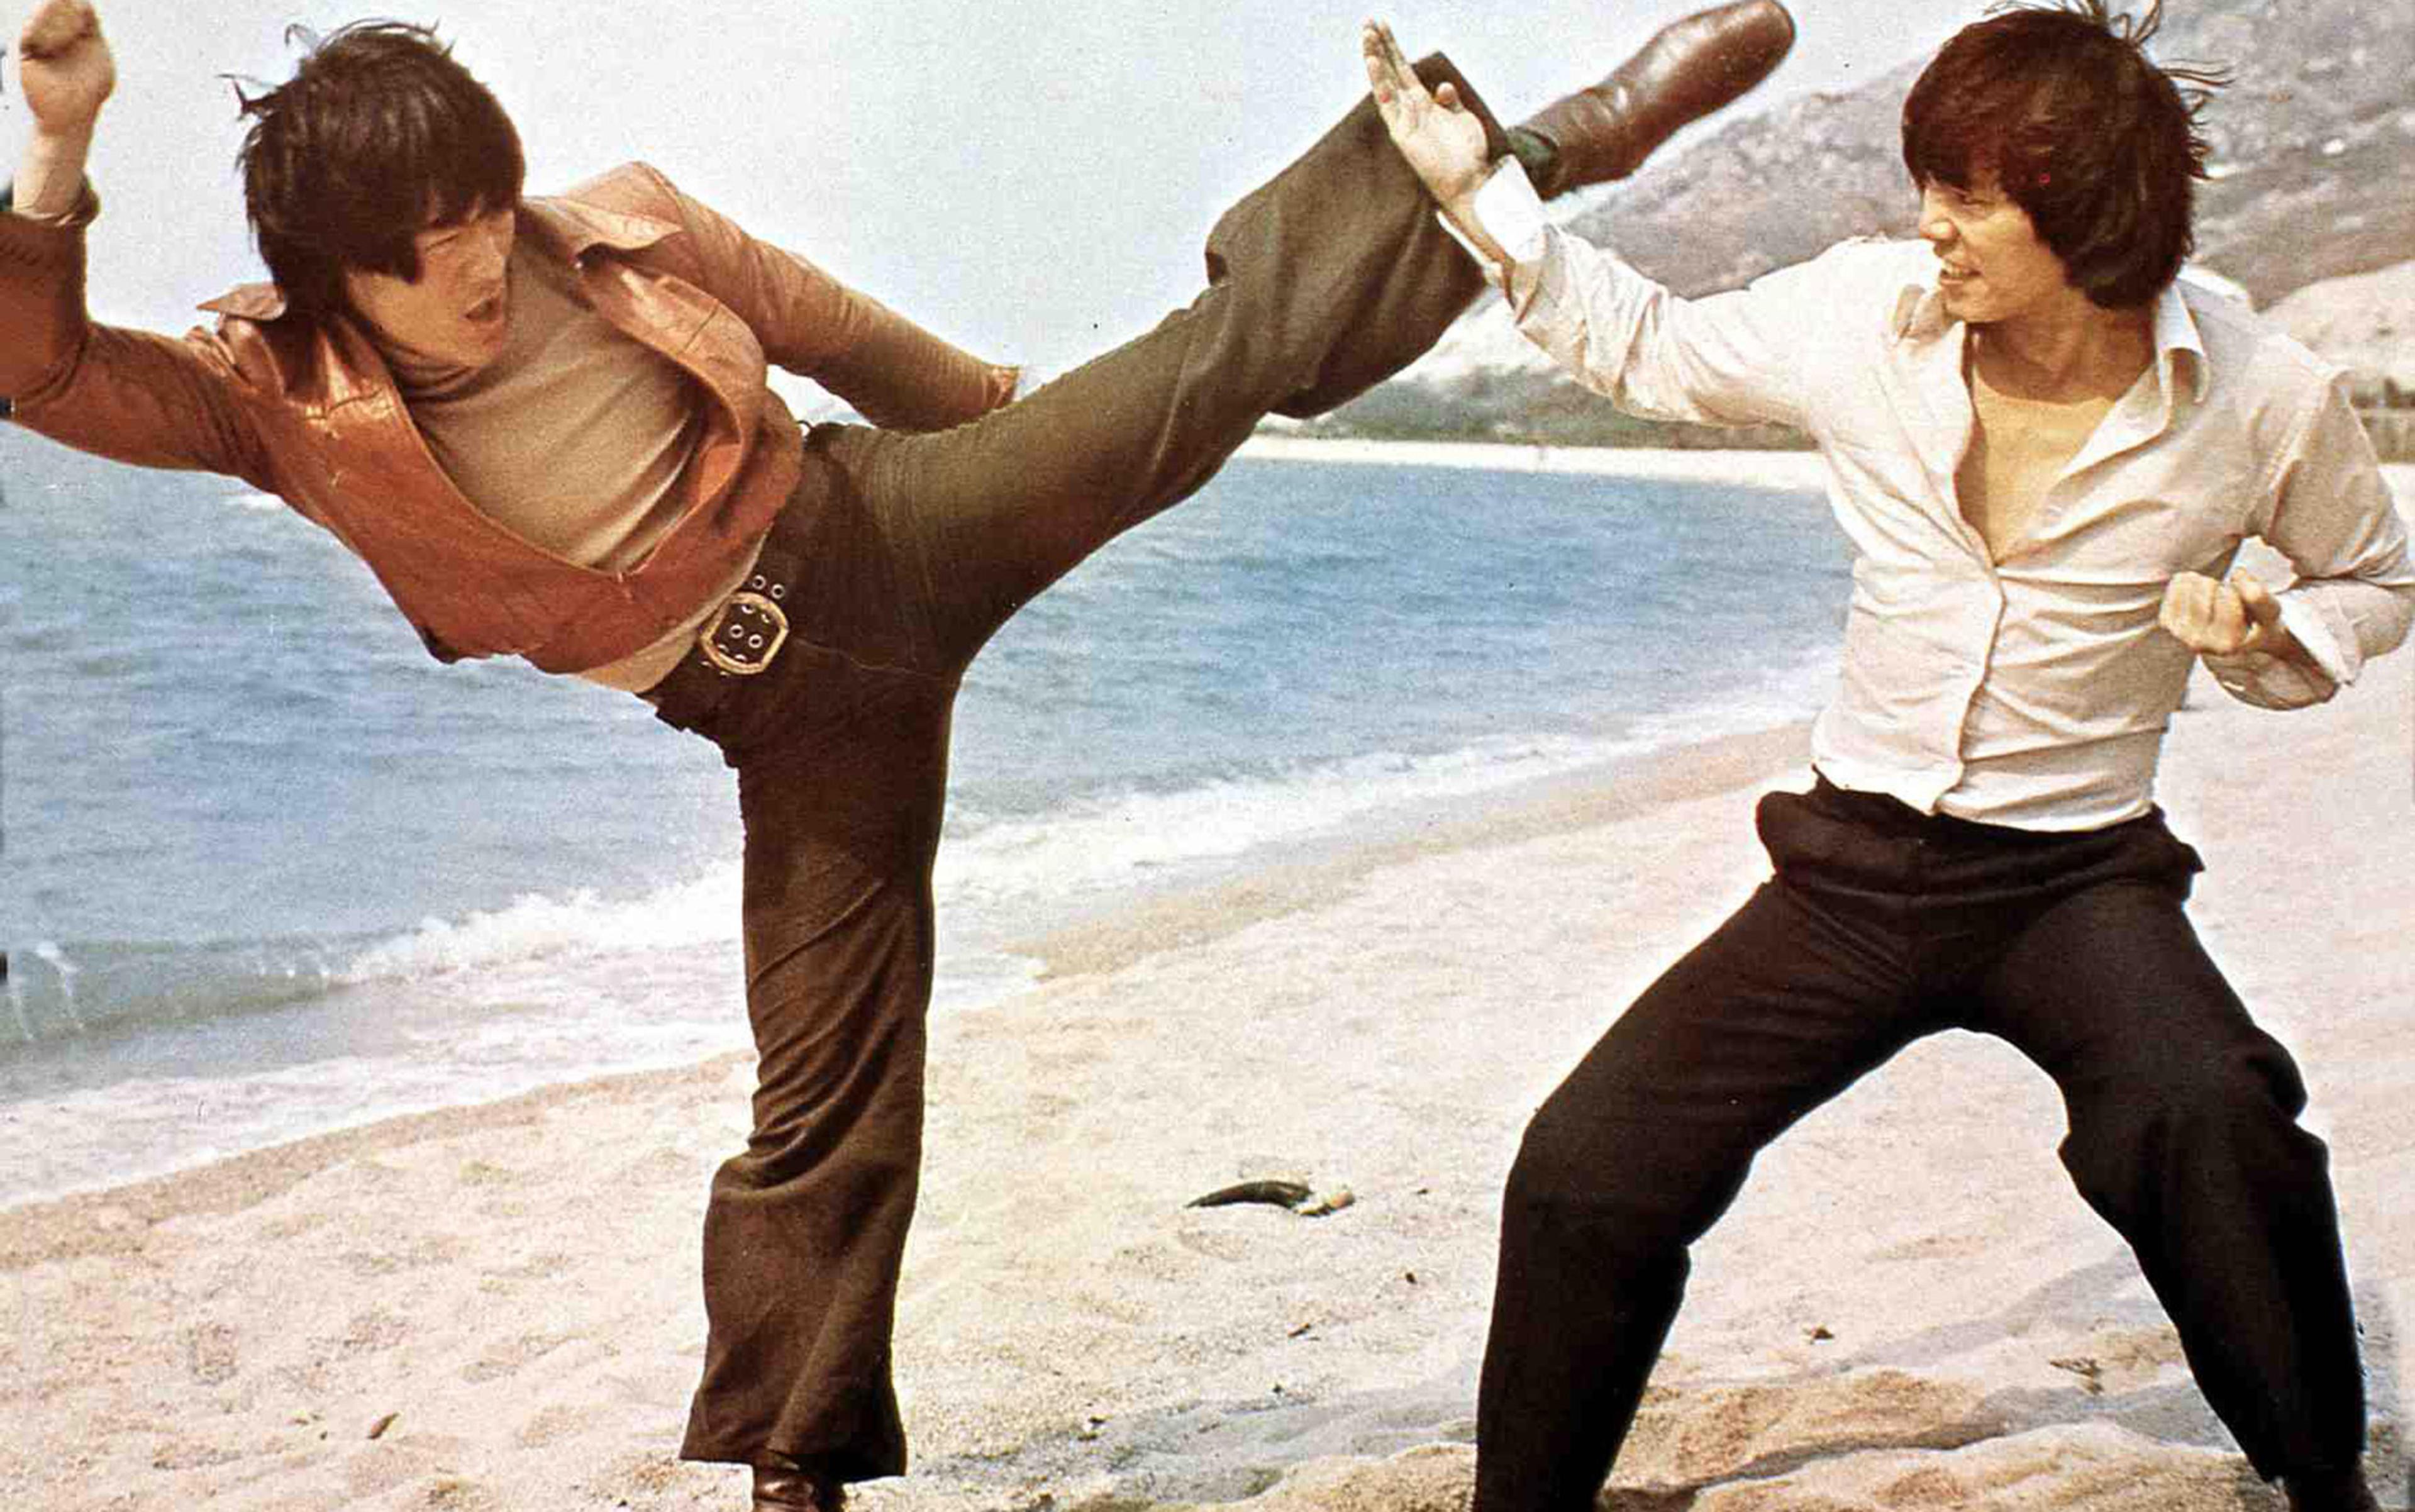 Two Asian film actors are fighting kung-fu style on the beach dressed in 1970s style casual clothes